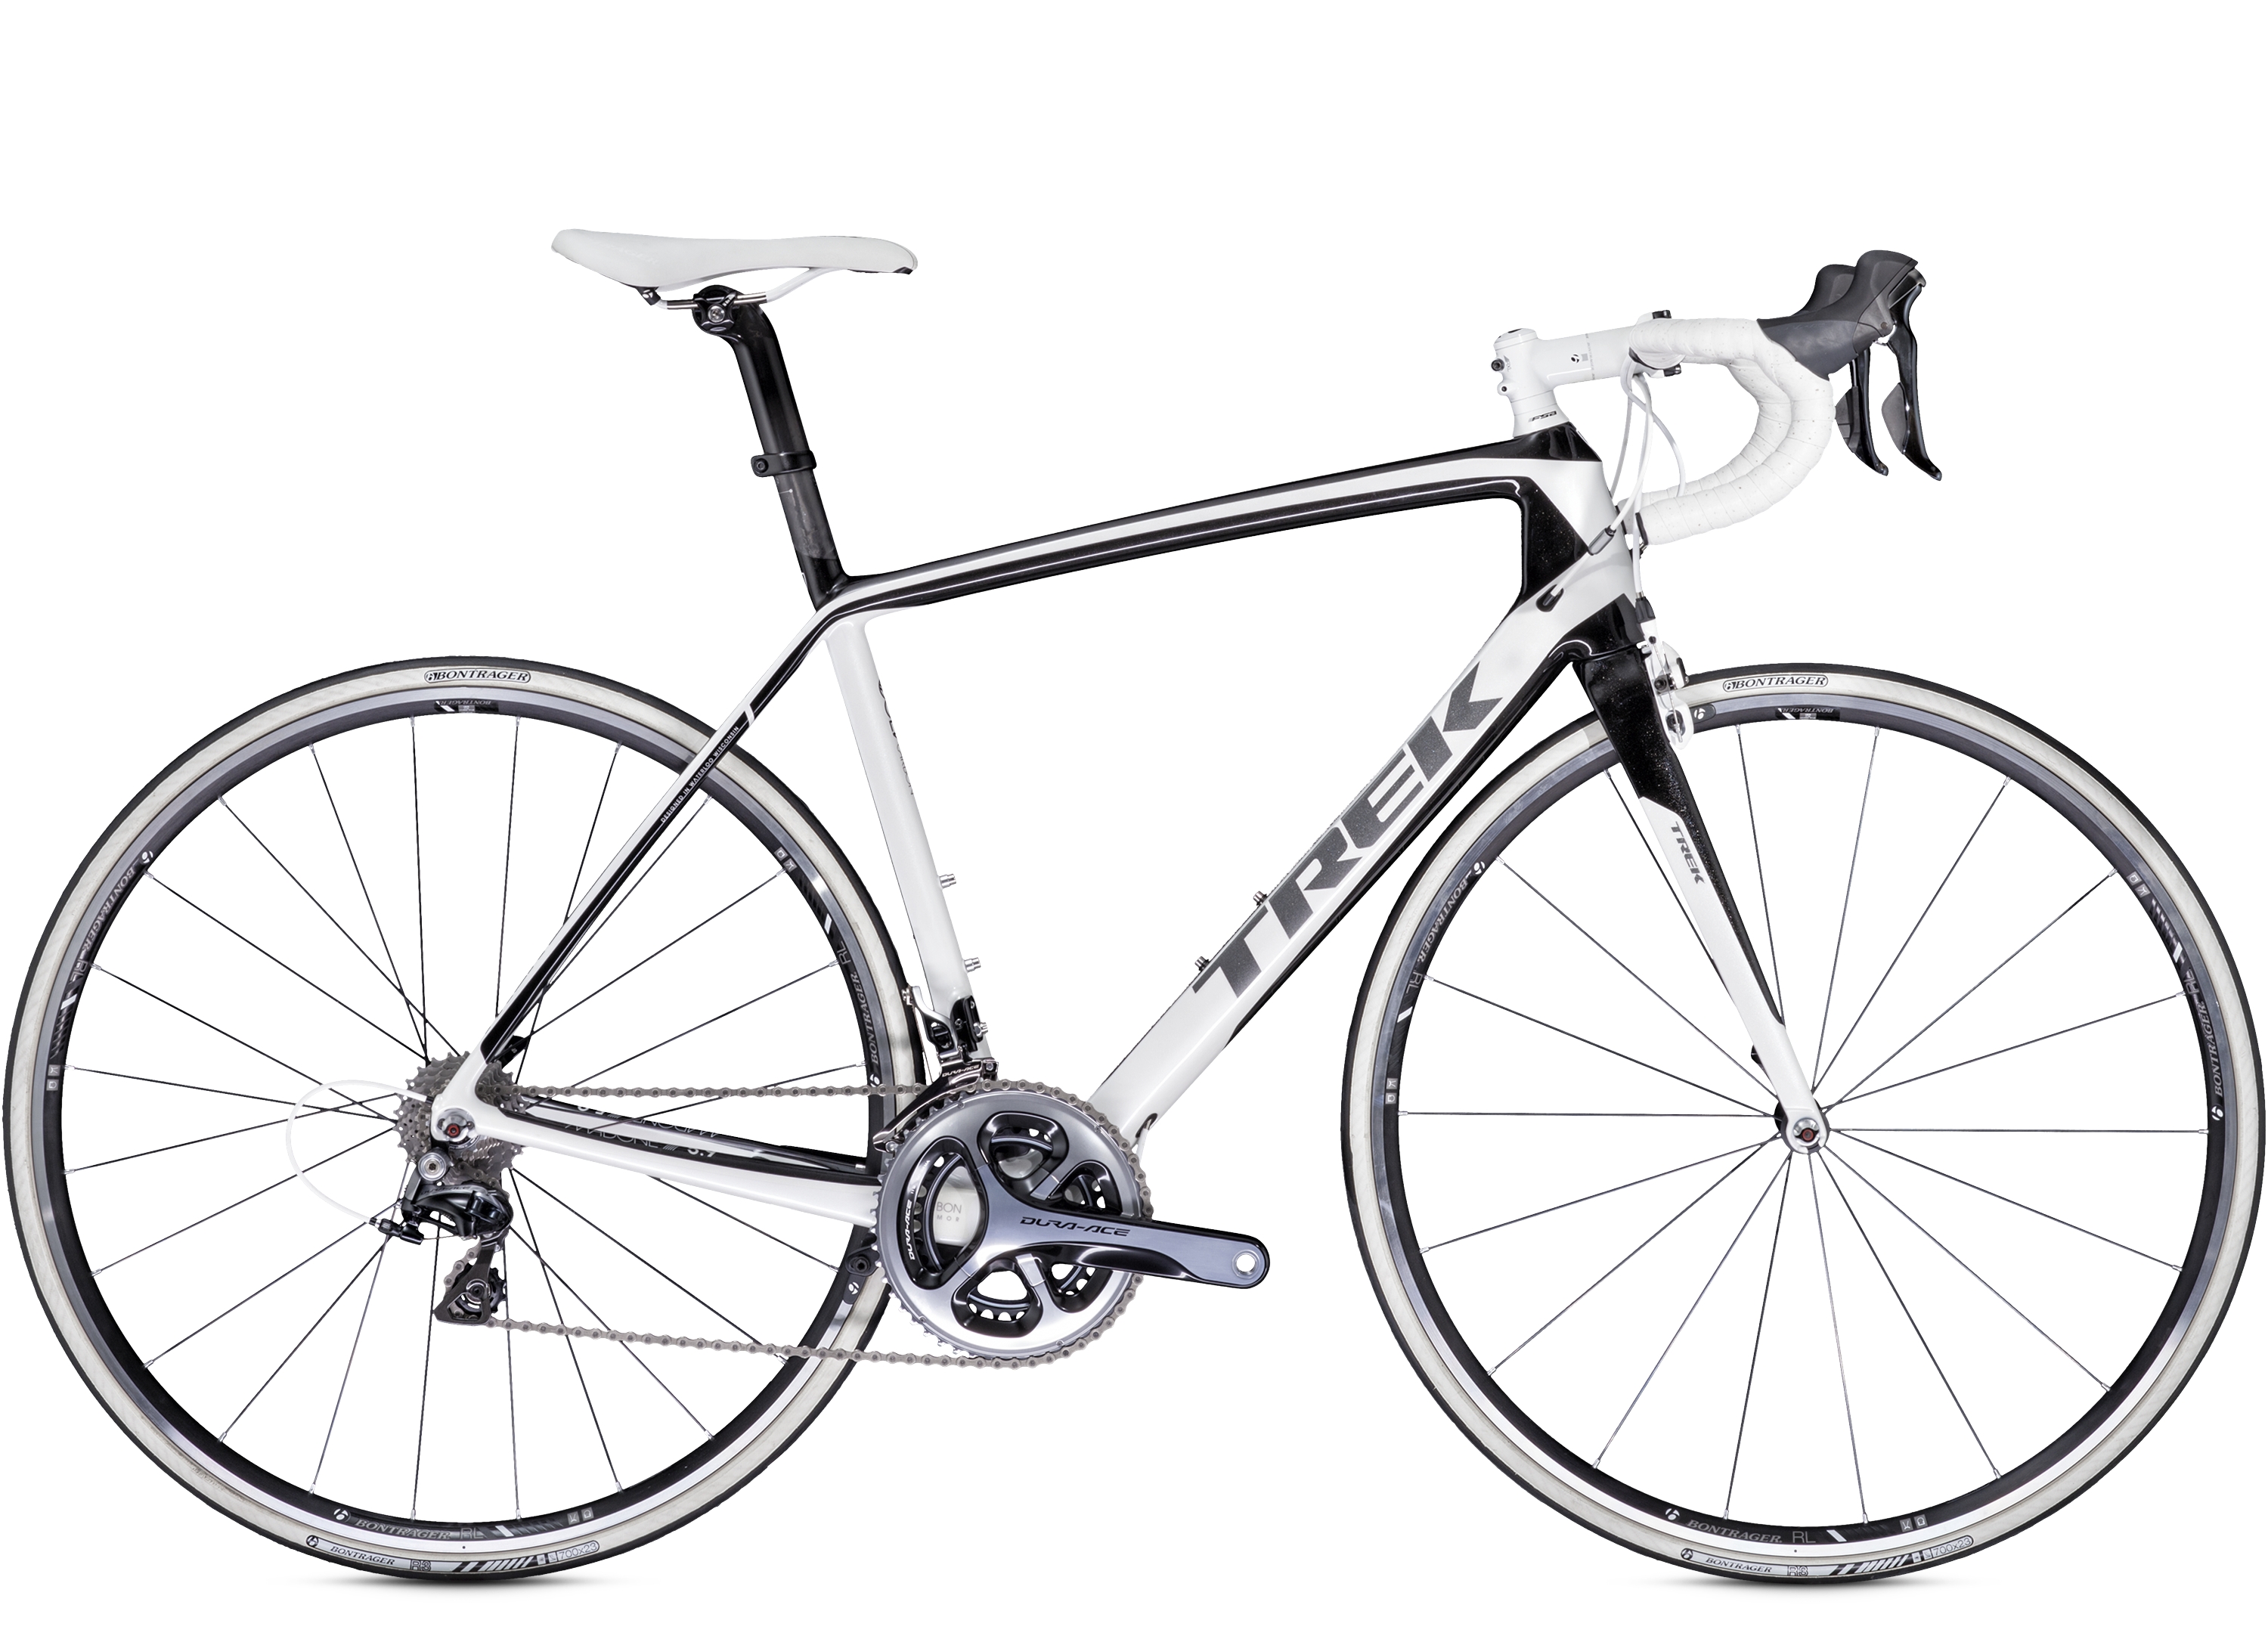 2014 Madone 5.9 H2 Compact Dura-Ace 